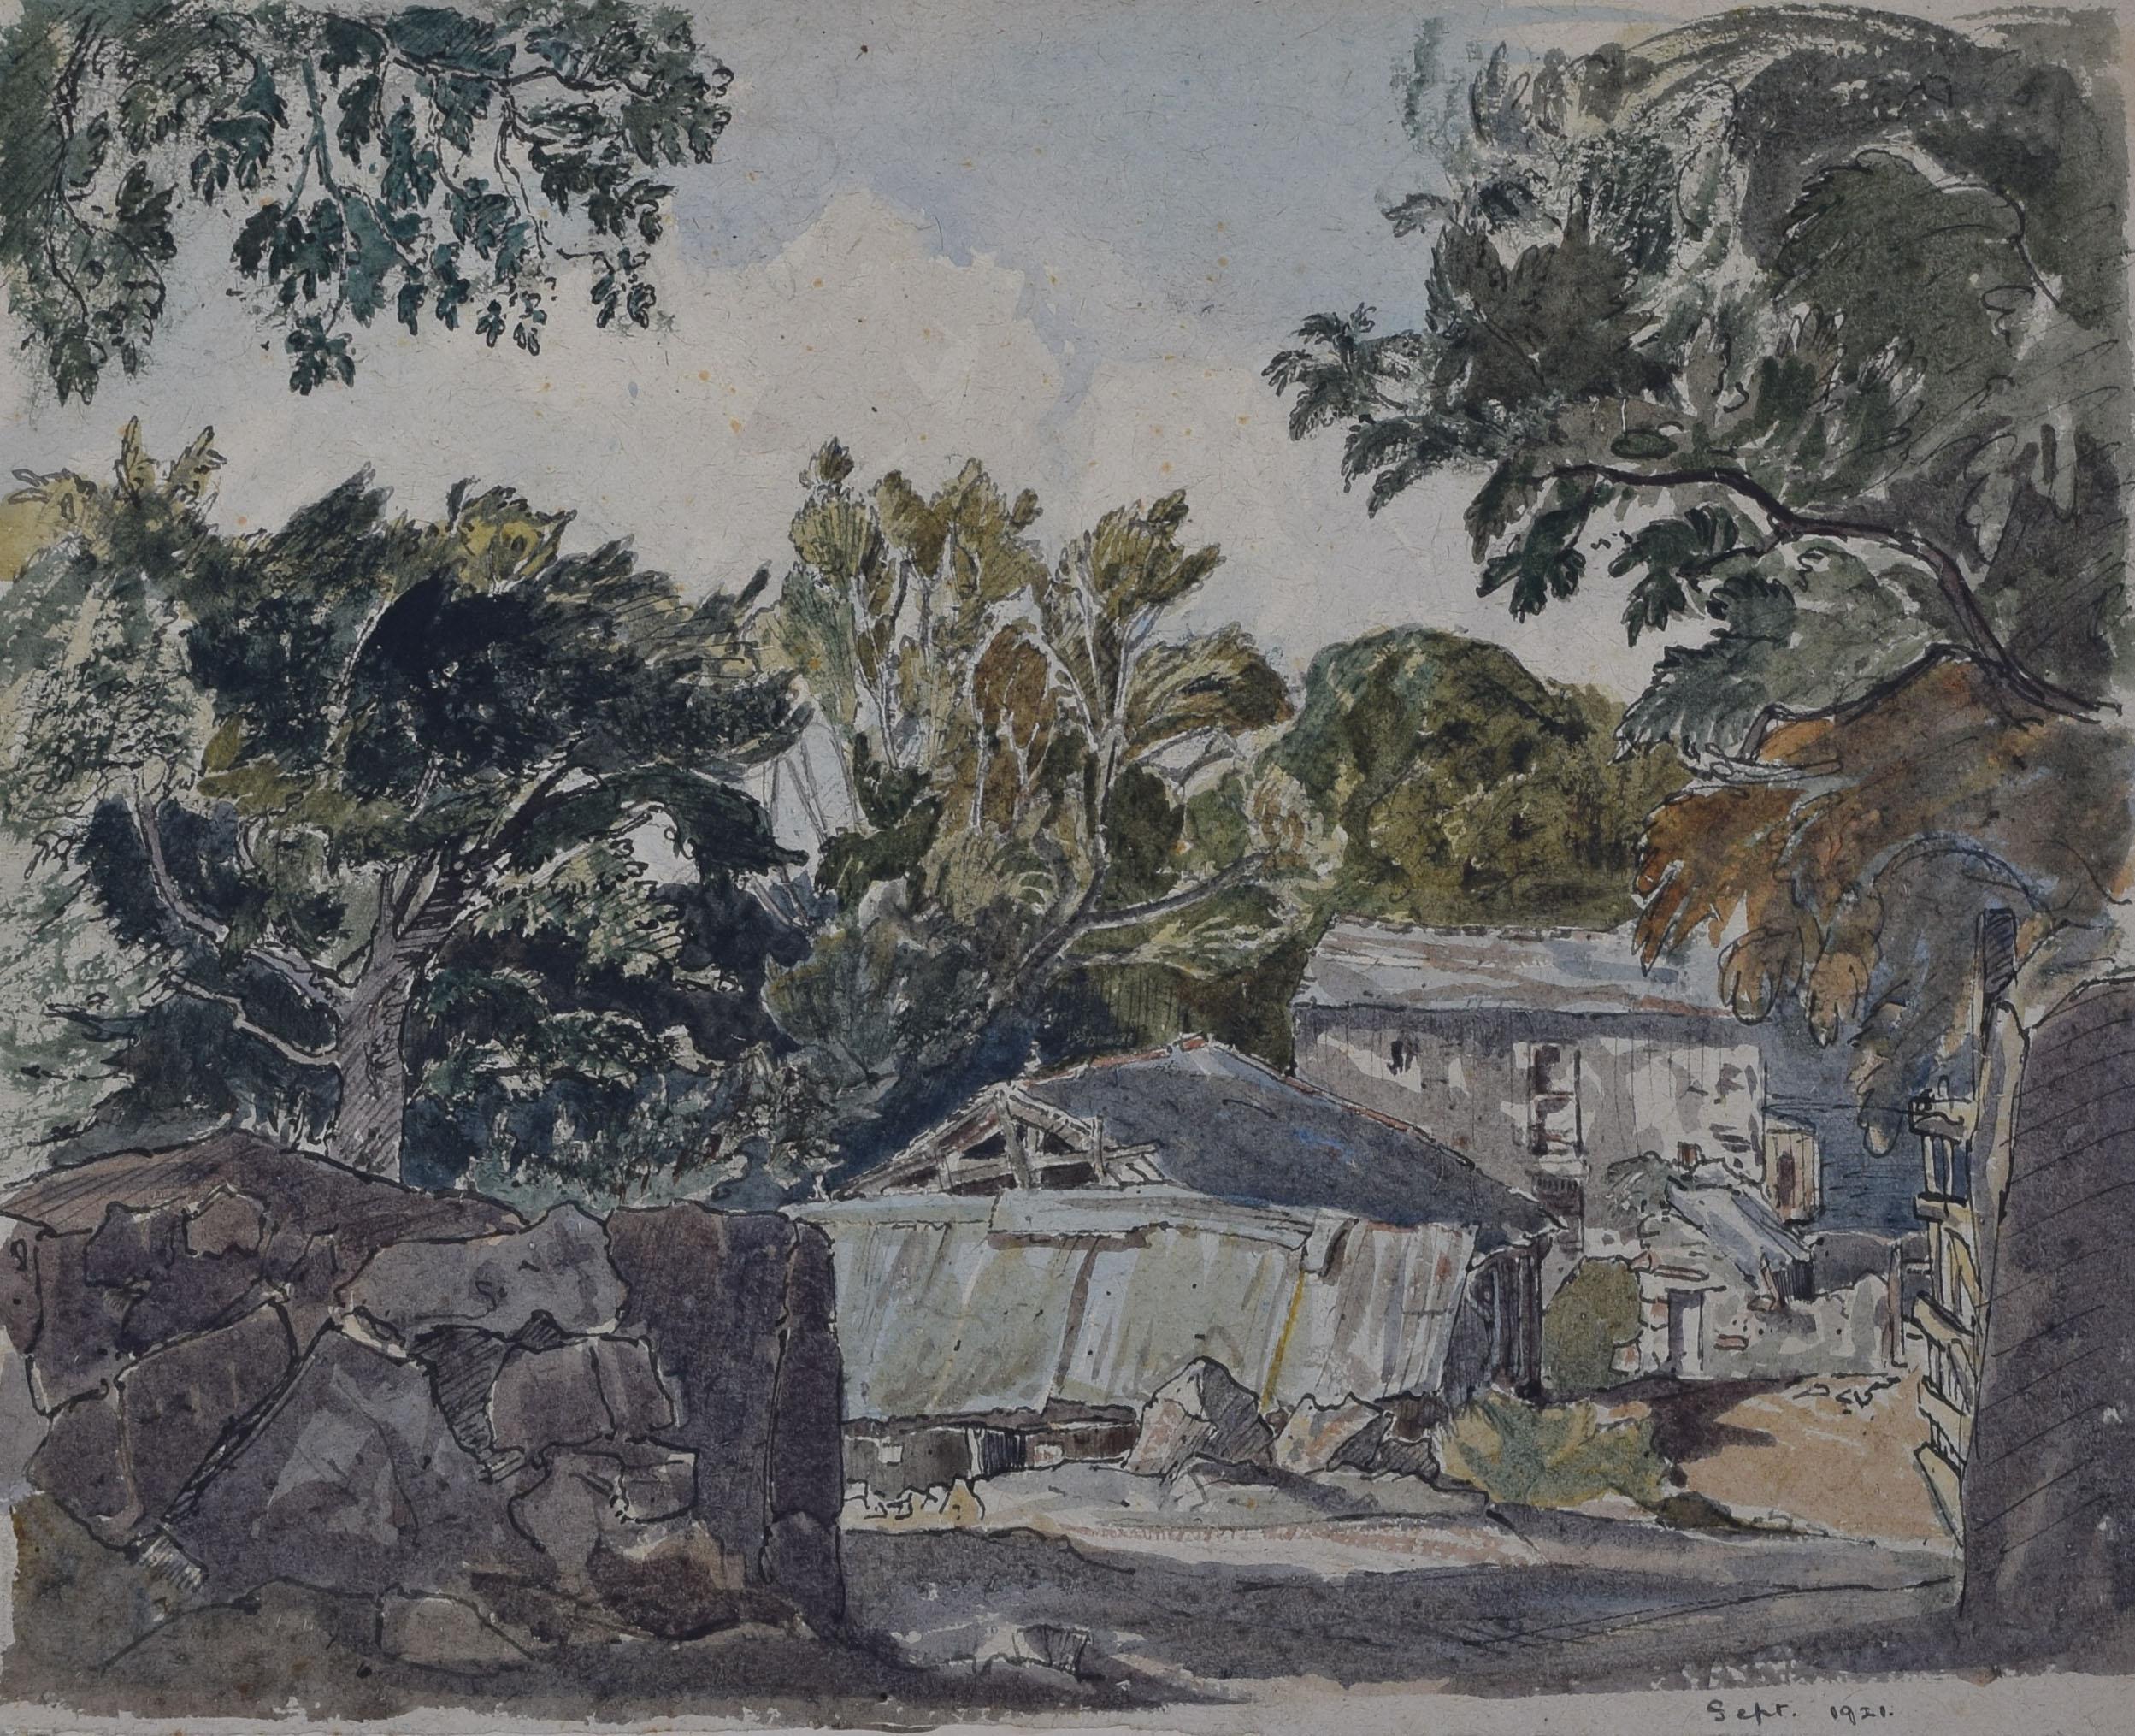 We acquired a series of paintings from Claude Muncaster's studio. To find more scroll down to "More from this Seller" and below it click on "See all from this seller." 

Claude Muncaster (1903-1974)
A Farmstead and Trees
Dated Sept 1921
Signed on